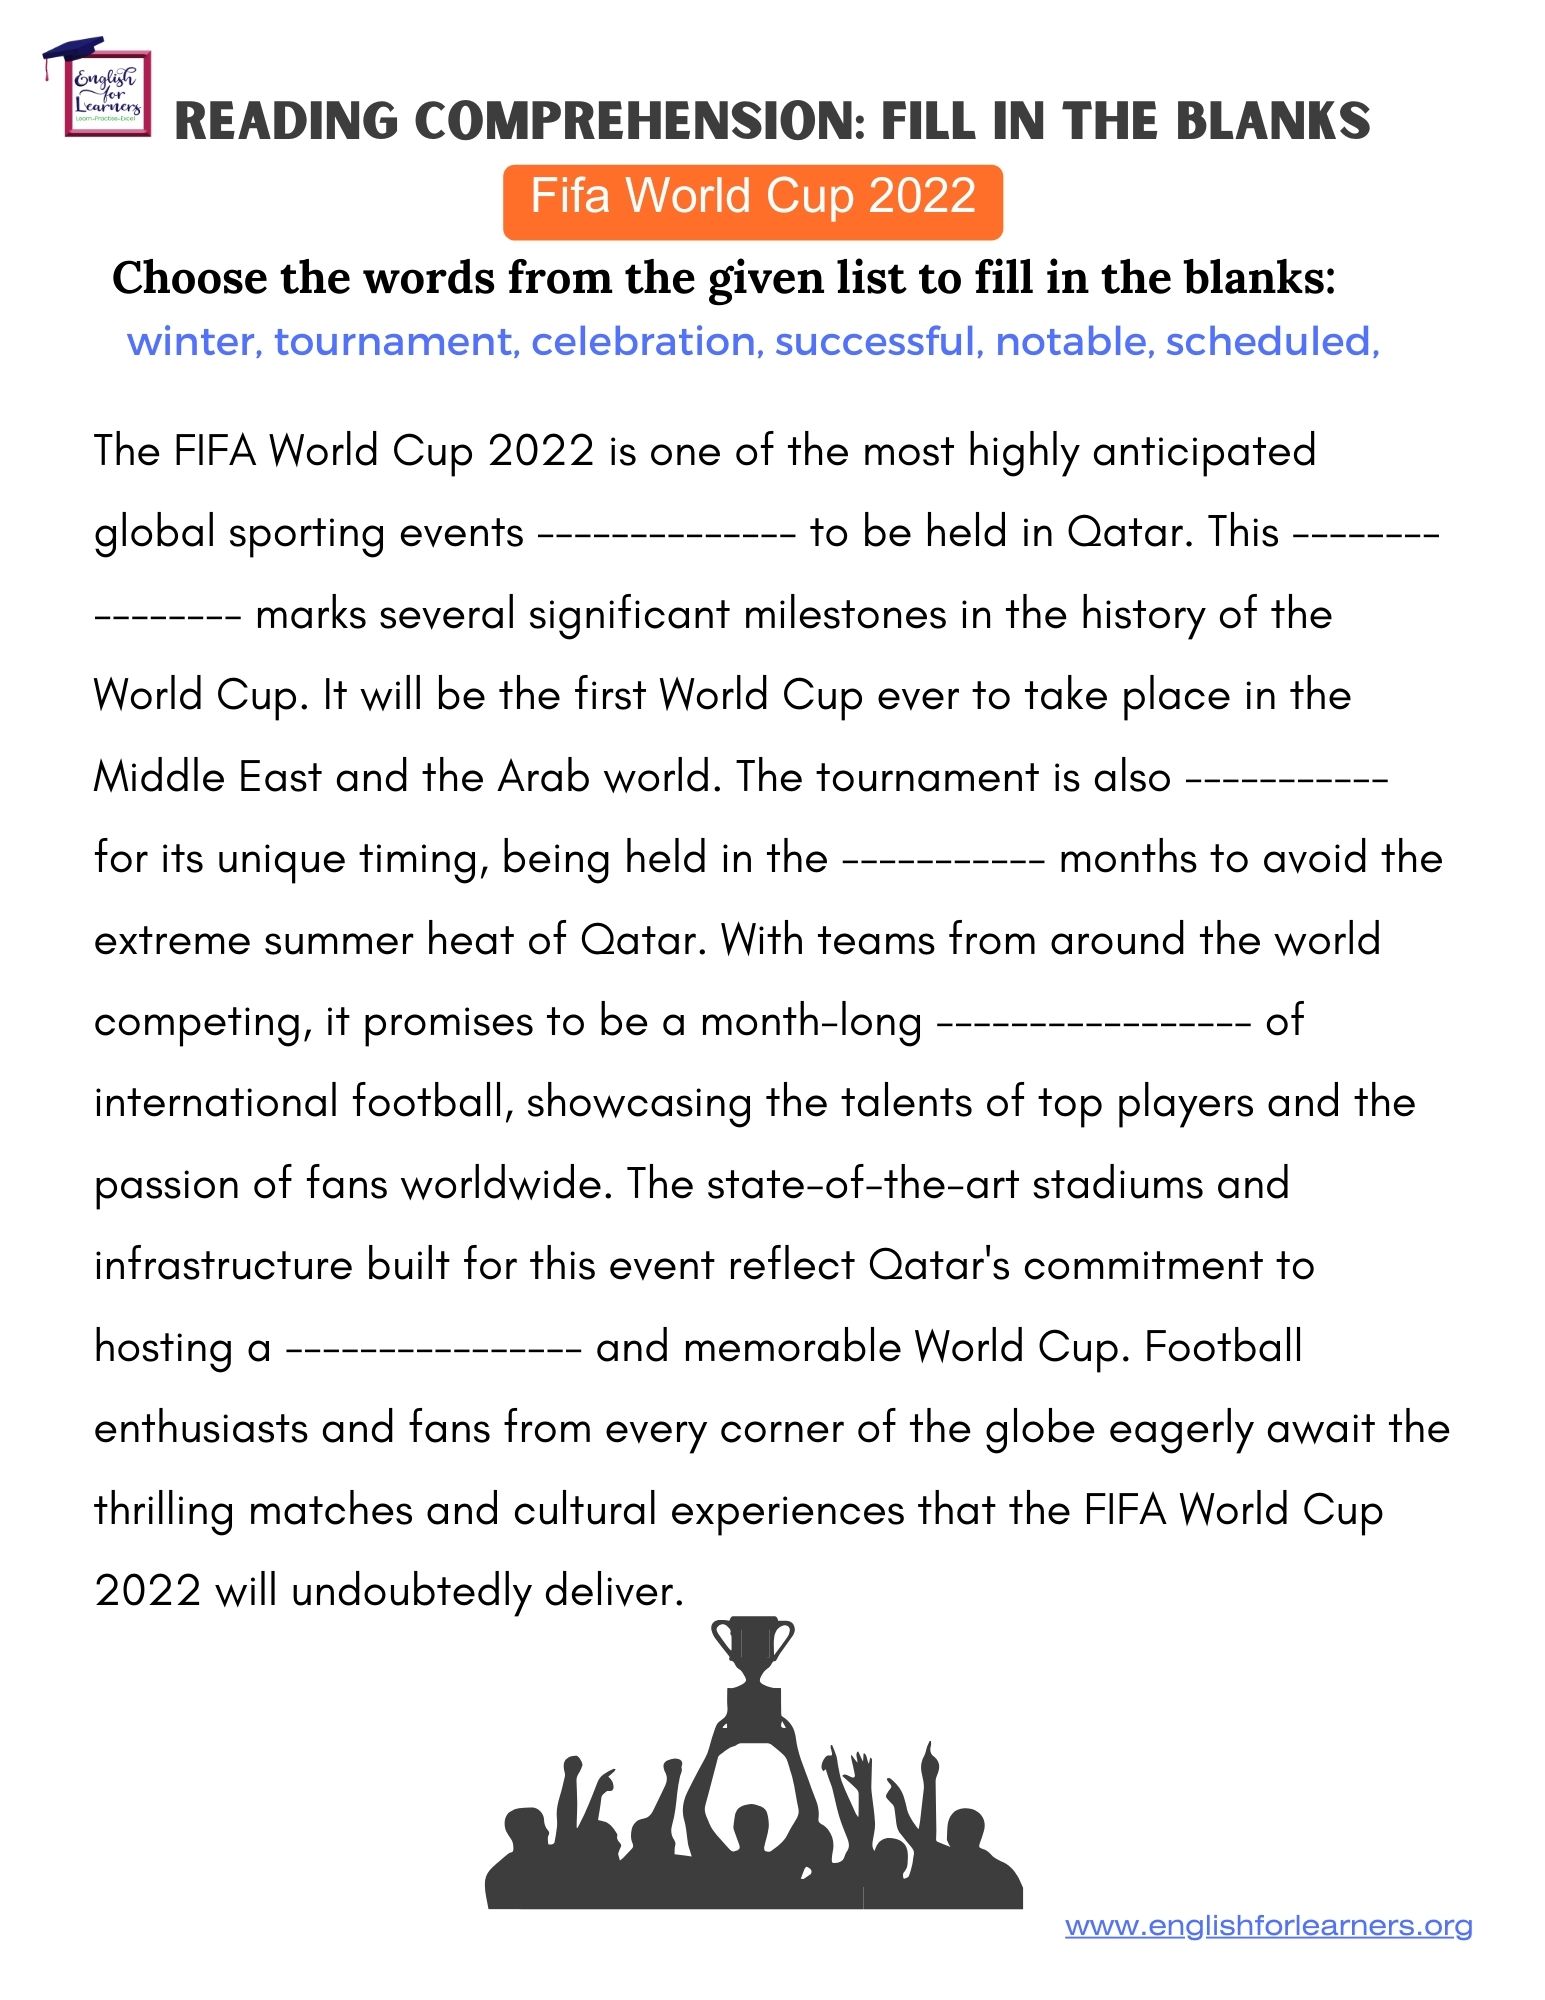 Fill in the Blanks Exercise FIFA World Cup 2022, reading comprehension exercise,fifa World Cup reading comprehension
 